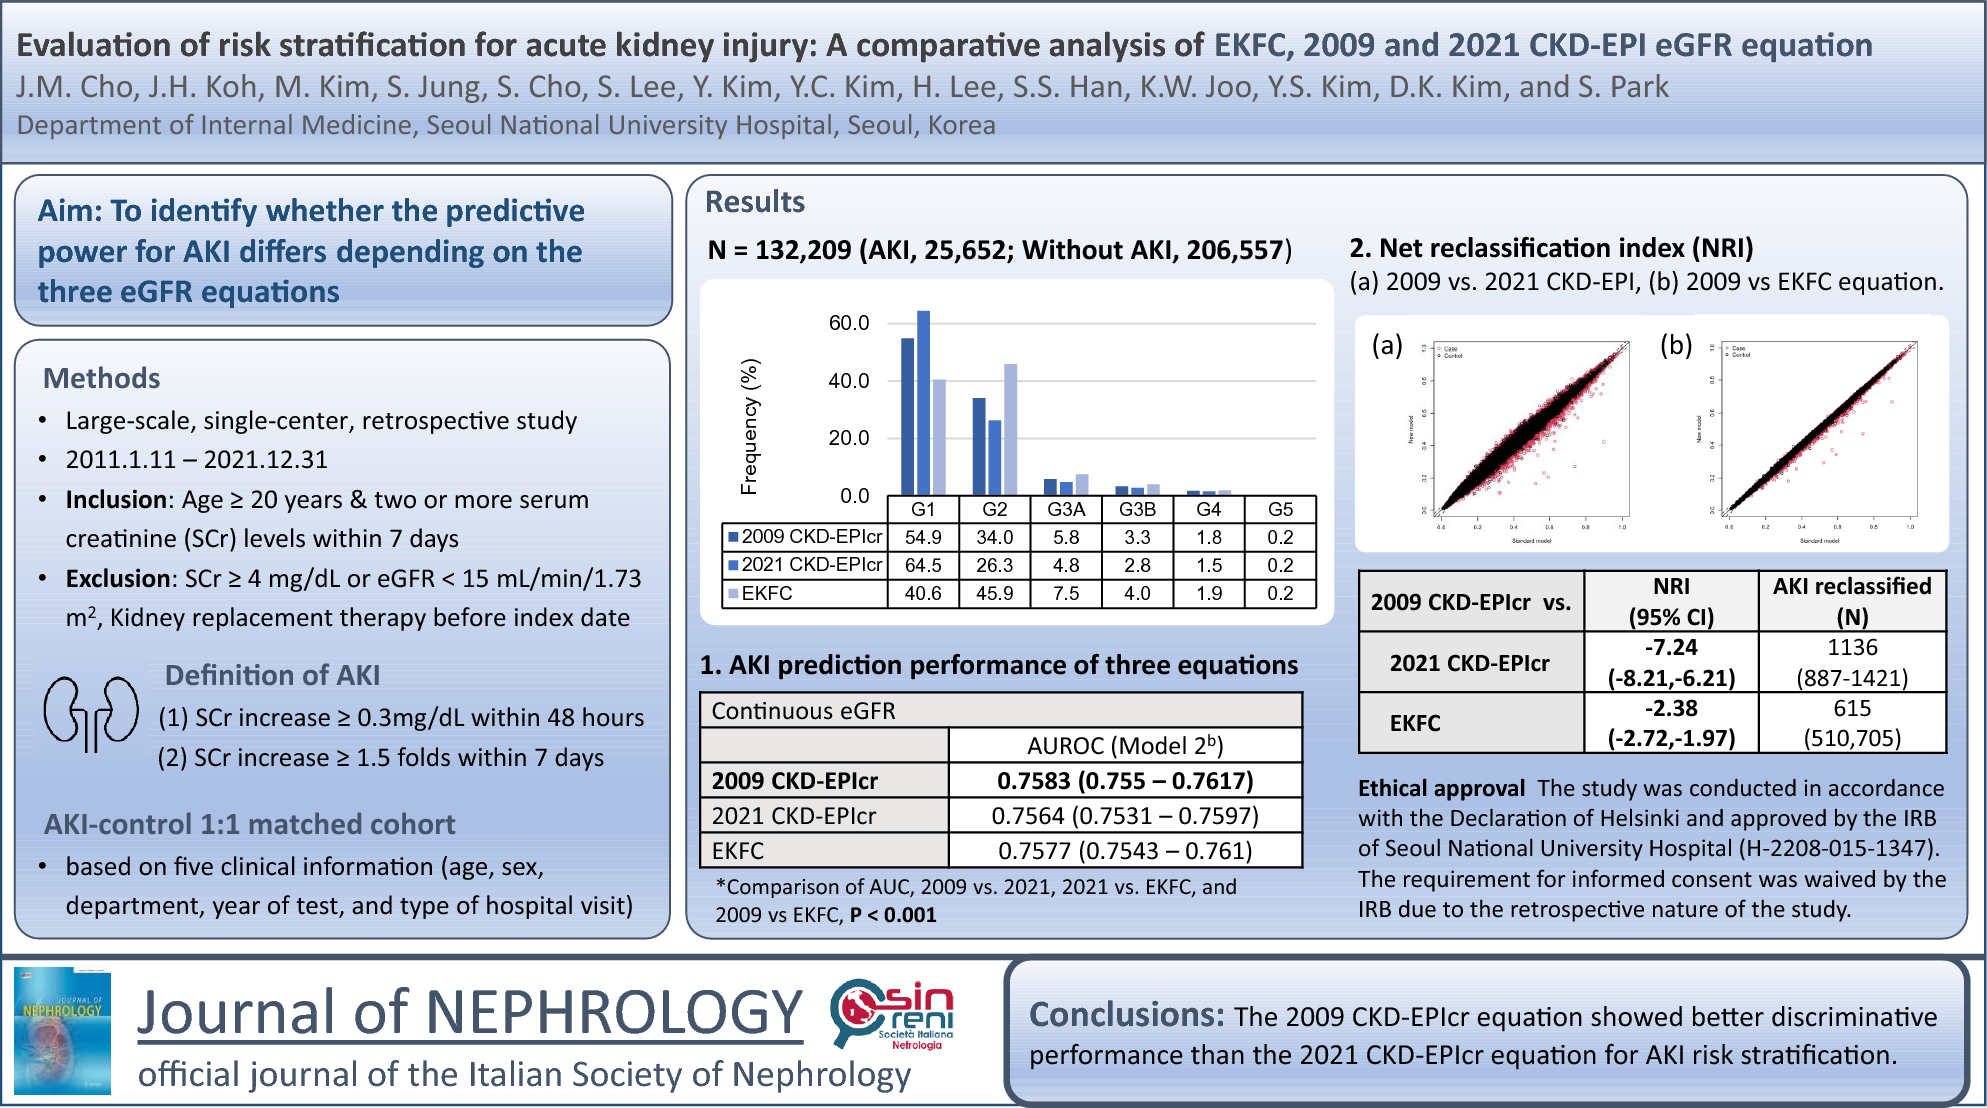 Evaluation of risk stratification for acute kidney injury: a comparative analysis of EKFC, 2009 and 2021 CKD-EPI glomerular filtration estimating equations